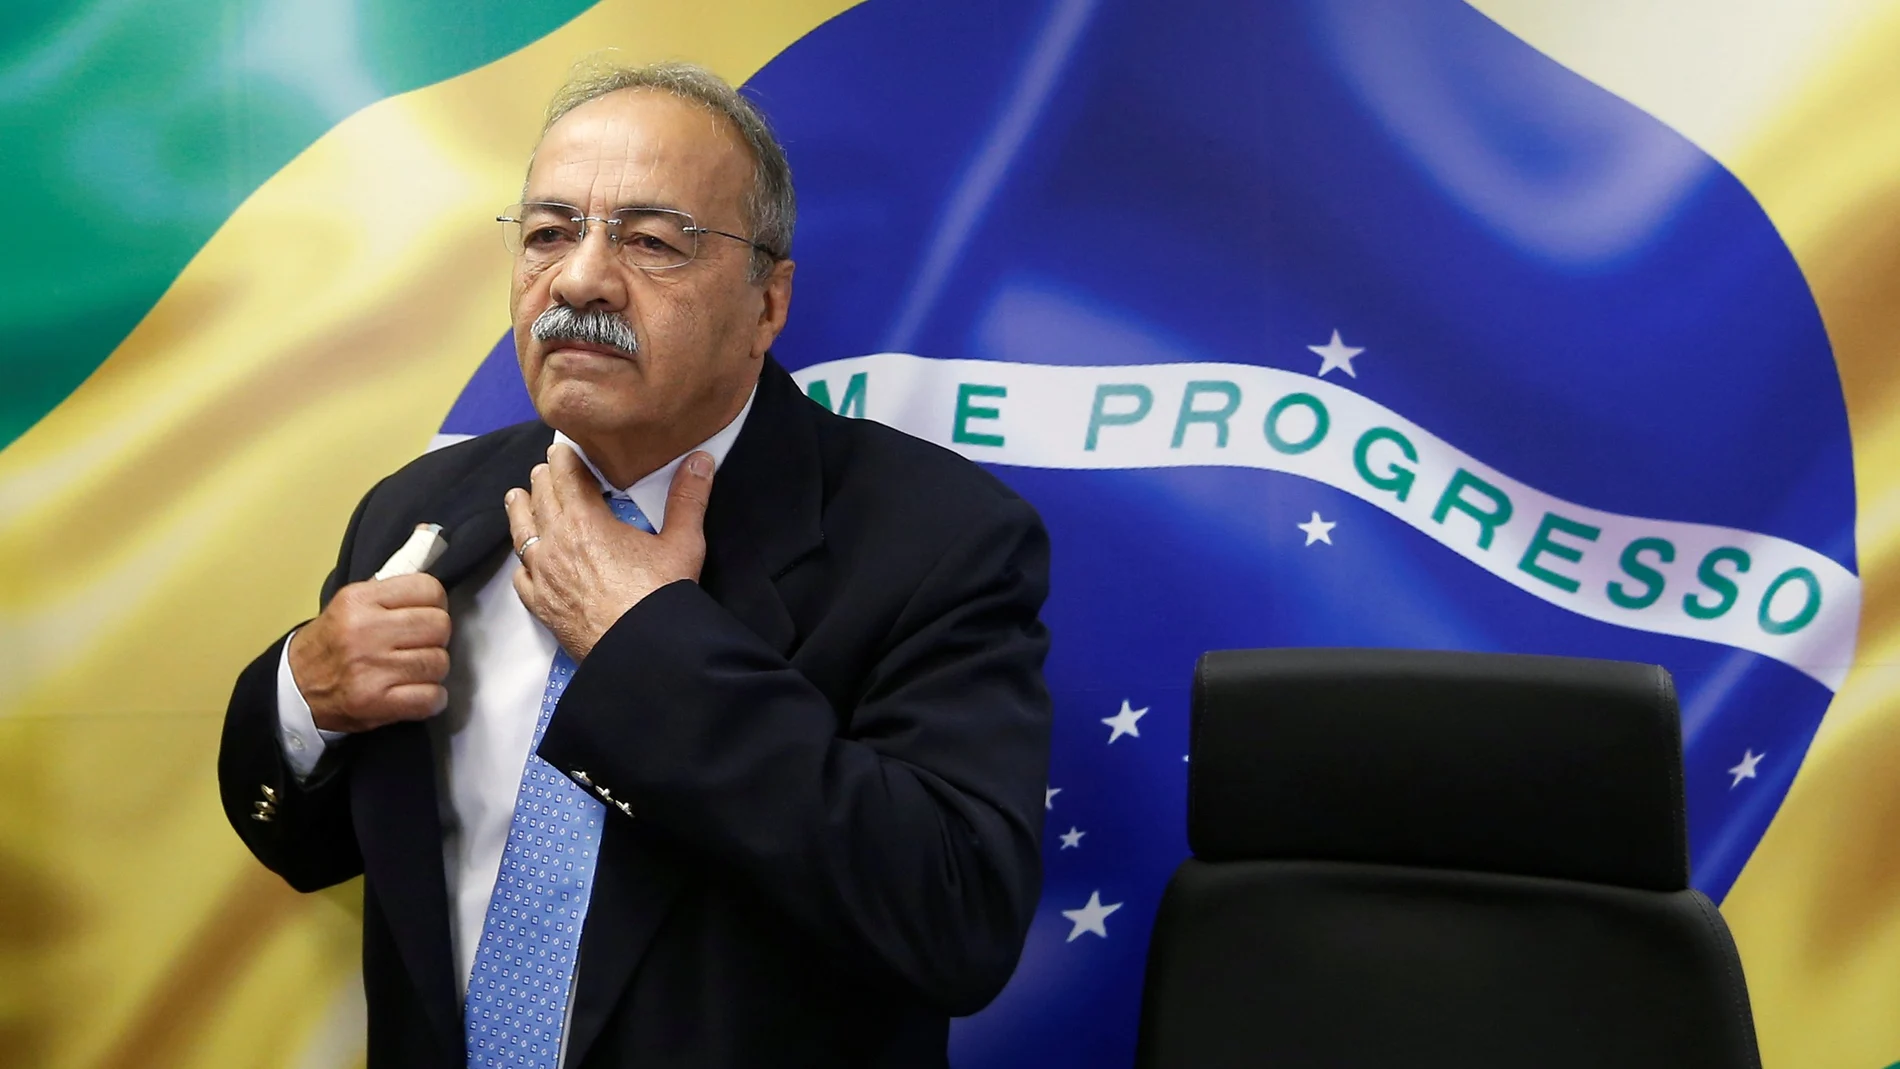 Brazil's Senator Chico Rodrigues reacts during a meeting with Brazilian Federal Deputy Eduardo Bolsonaro (not pictured) at the Federal Senate in Brasilia, Brazil August 9, 2019. Picture taken August 9, 2019. REUTERS/Adriano Machado